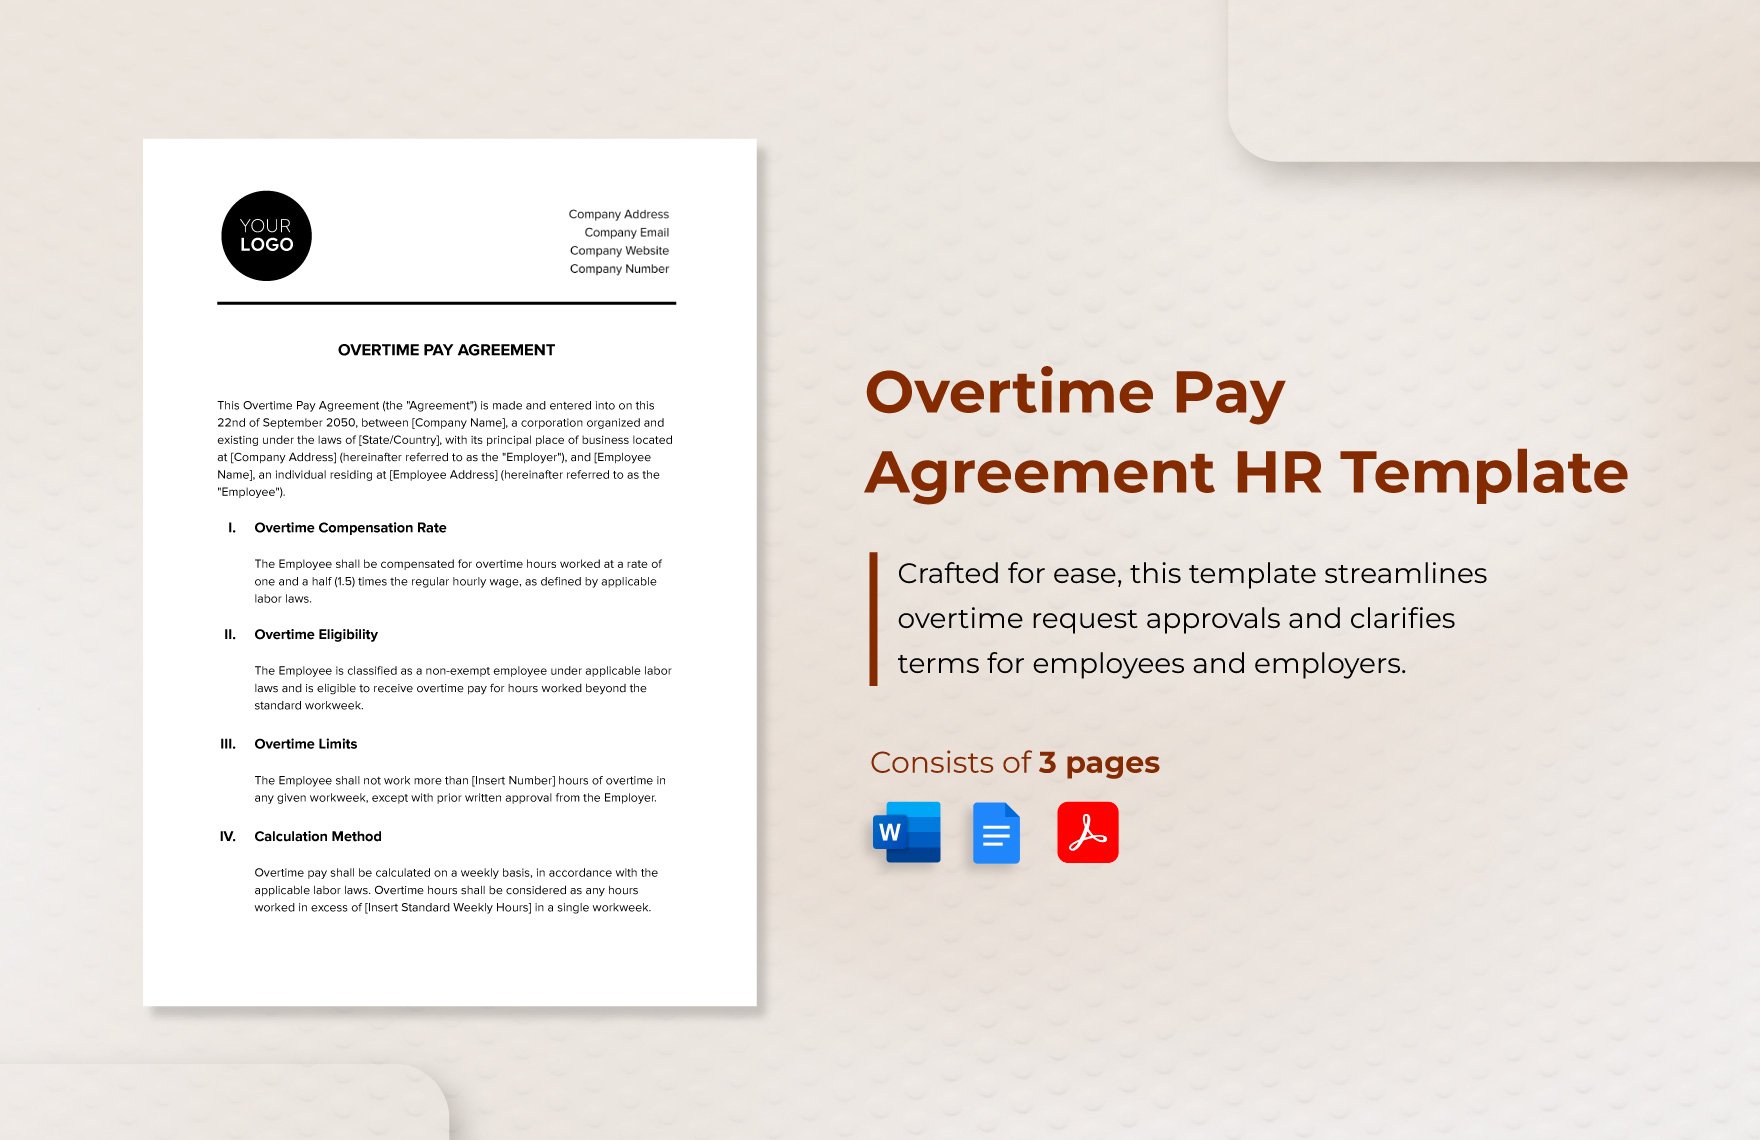 Overtime Pay Agreement HR Template